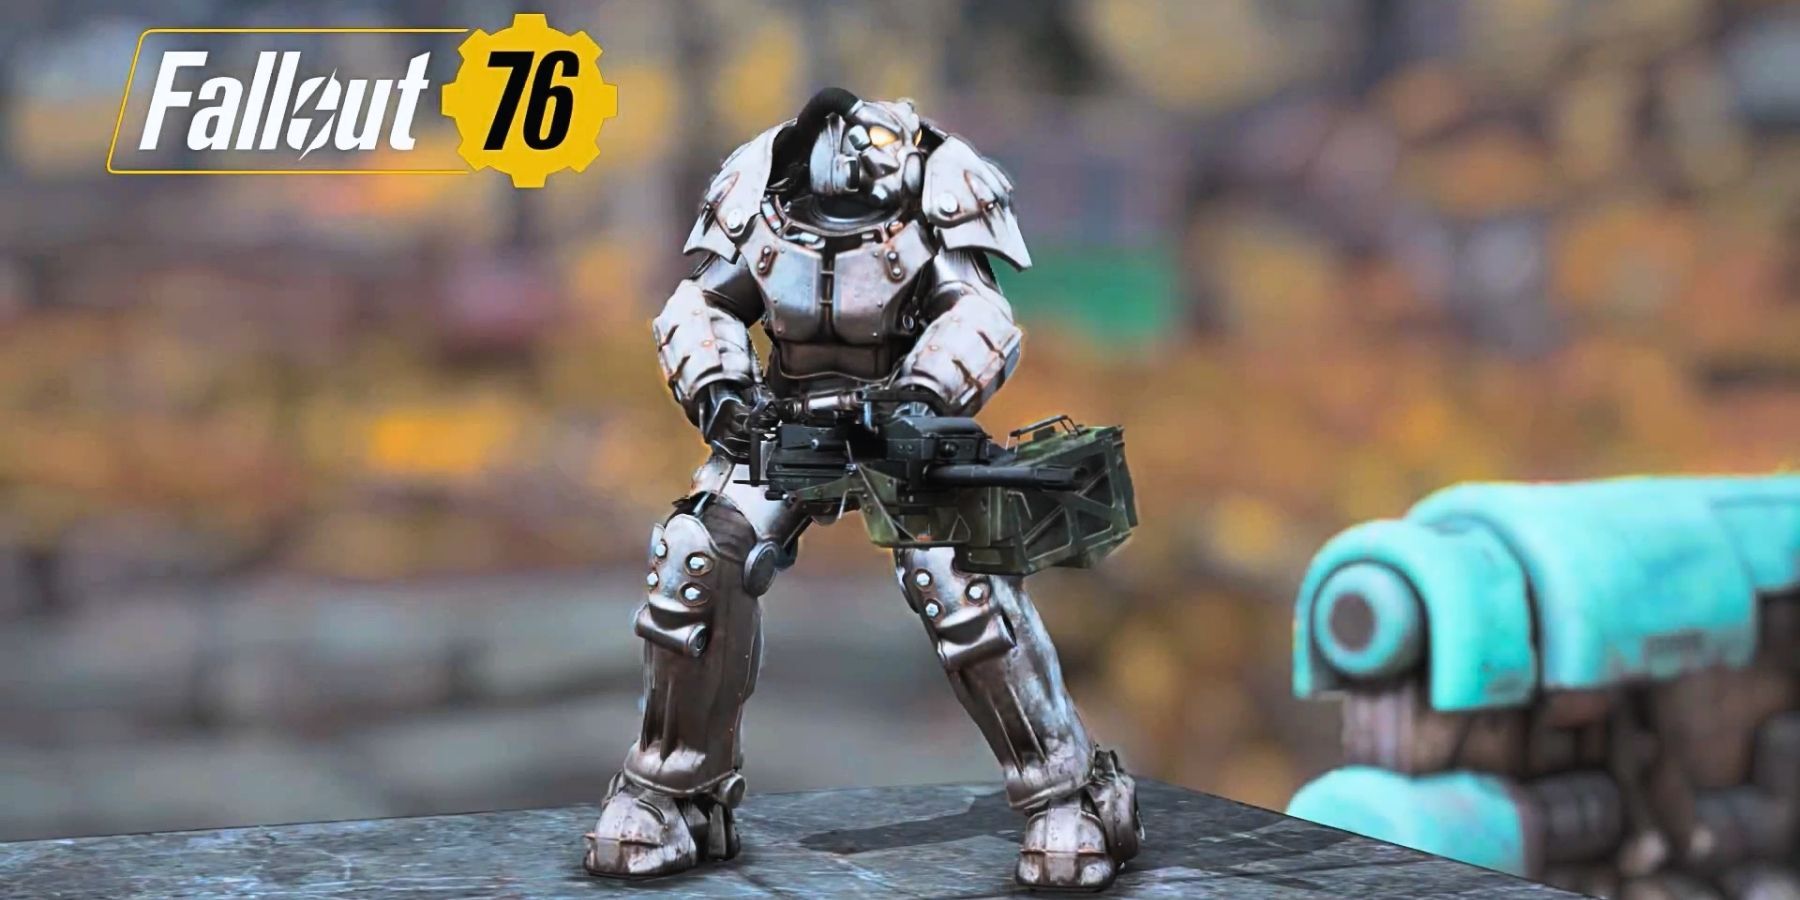 image showing the x-01 power armor in fallout 76. 